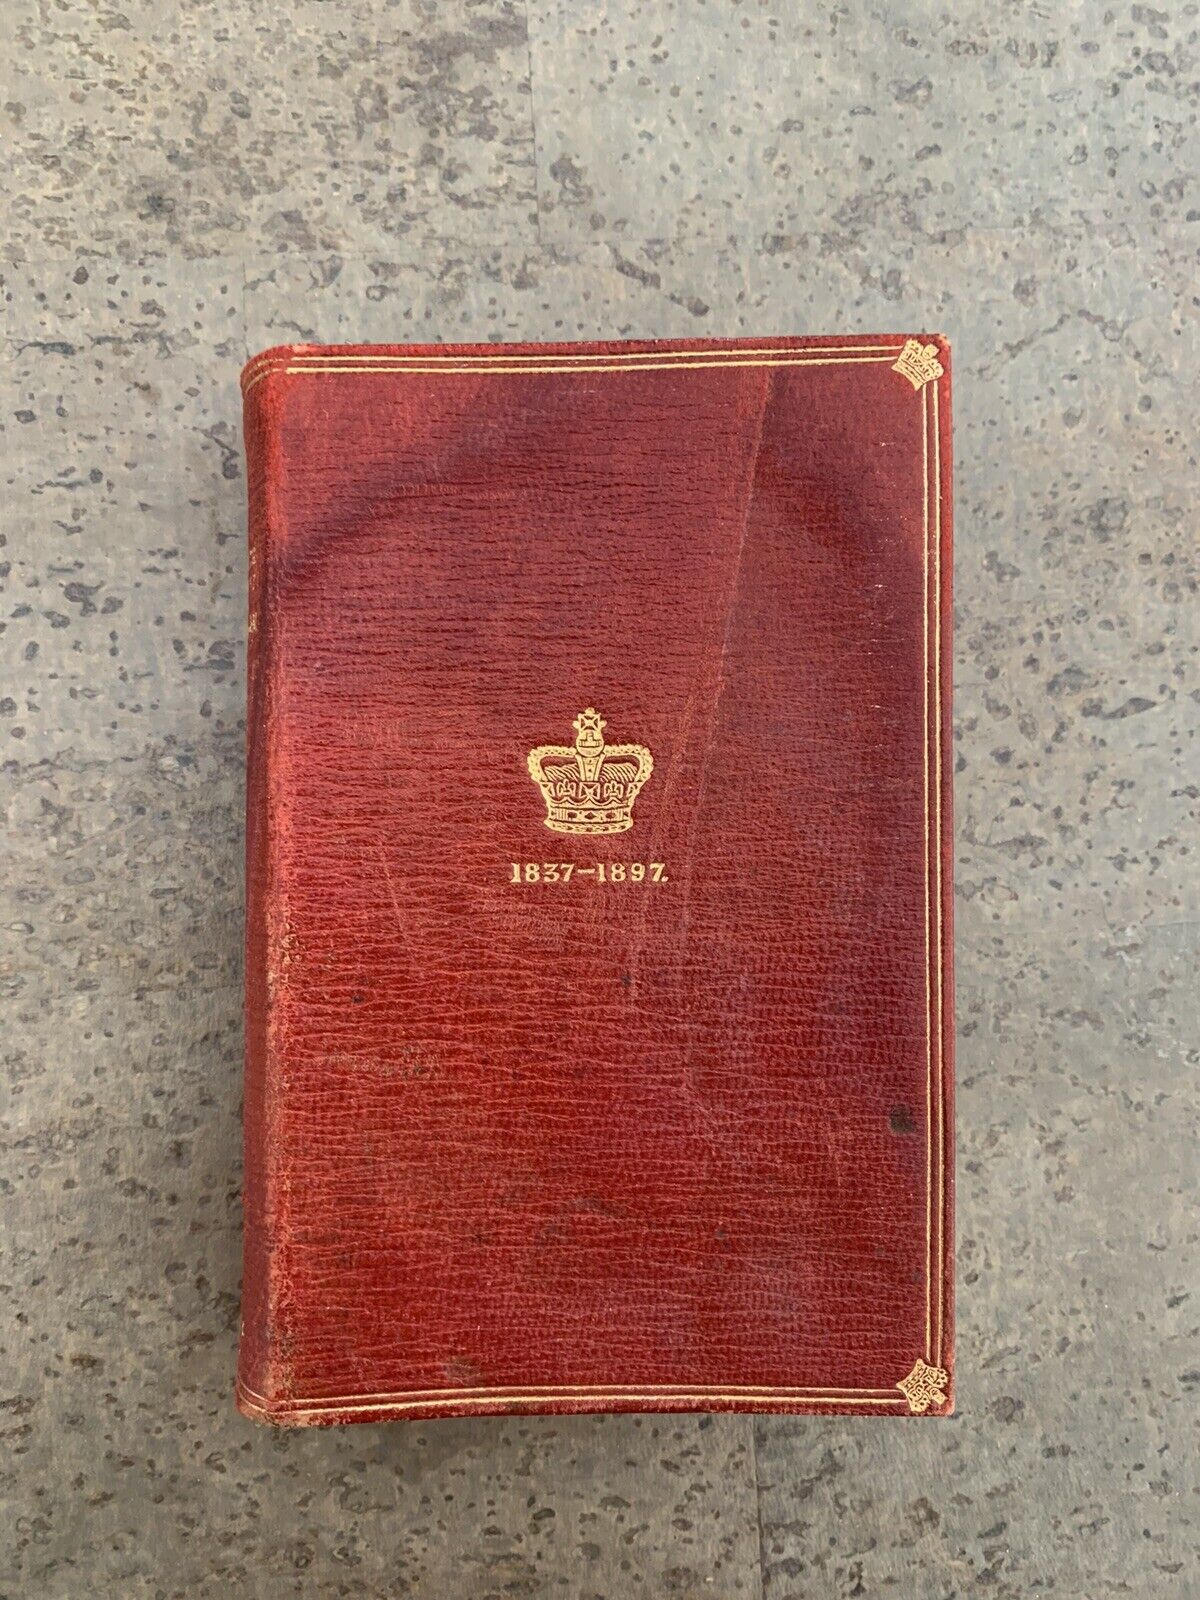 1837-1897 The Queen's Commemoration Prayer Book  Hymns A&M Miniature Red Leather